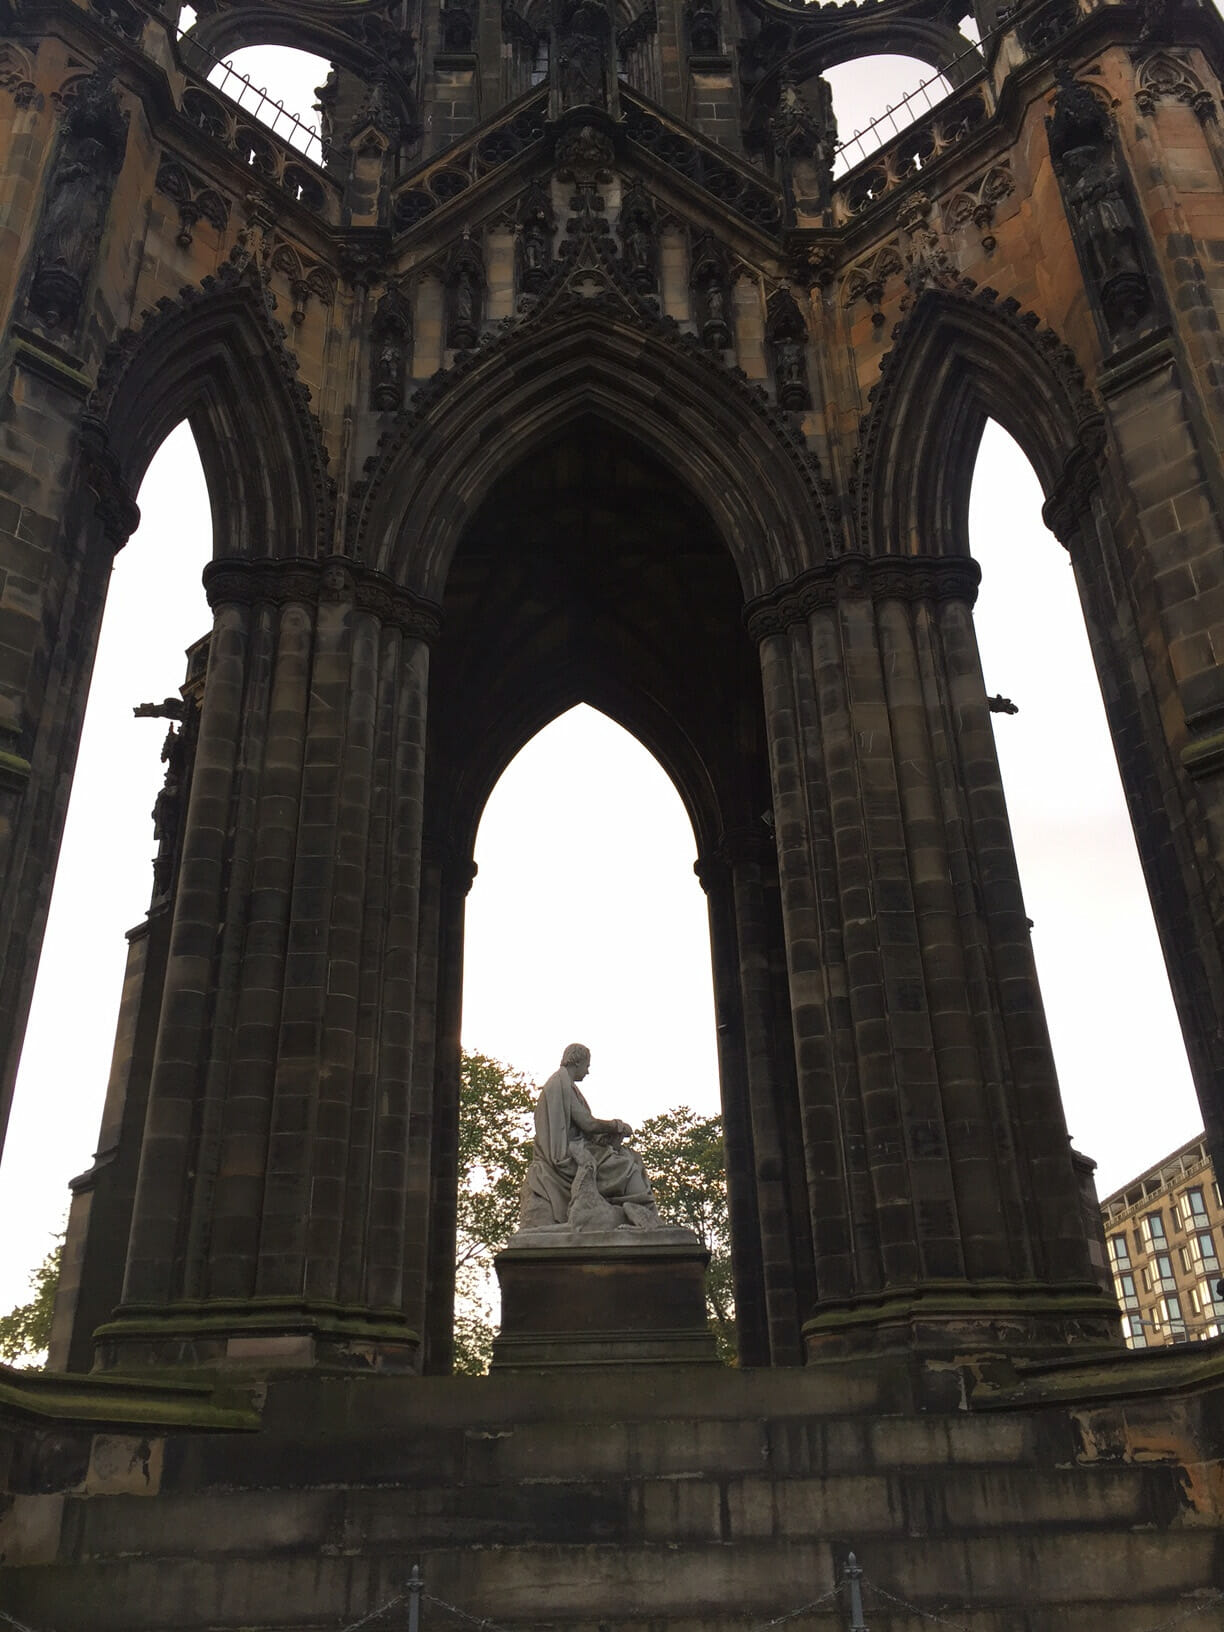 the Victorian Gothic style arches with a statue in the middle of the Scott Monument in Edinburgh